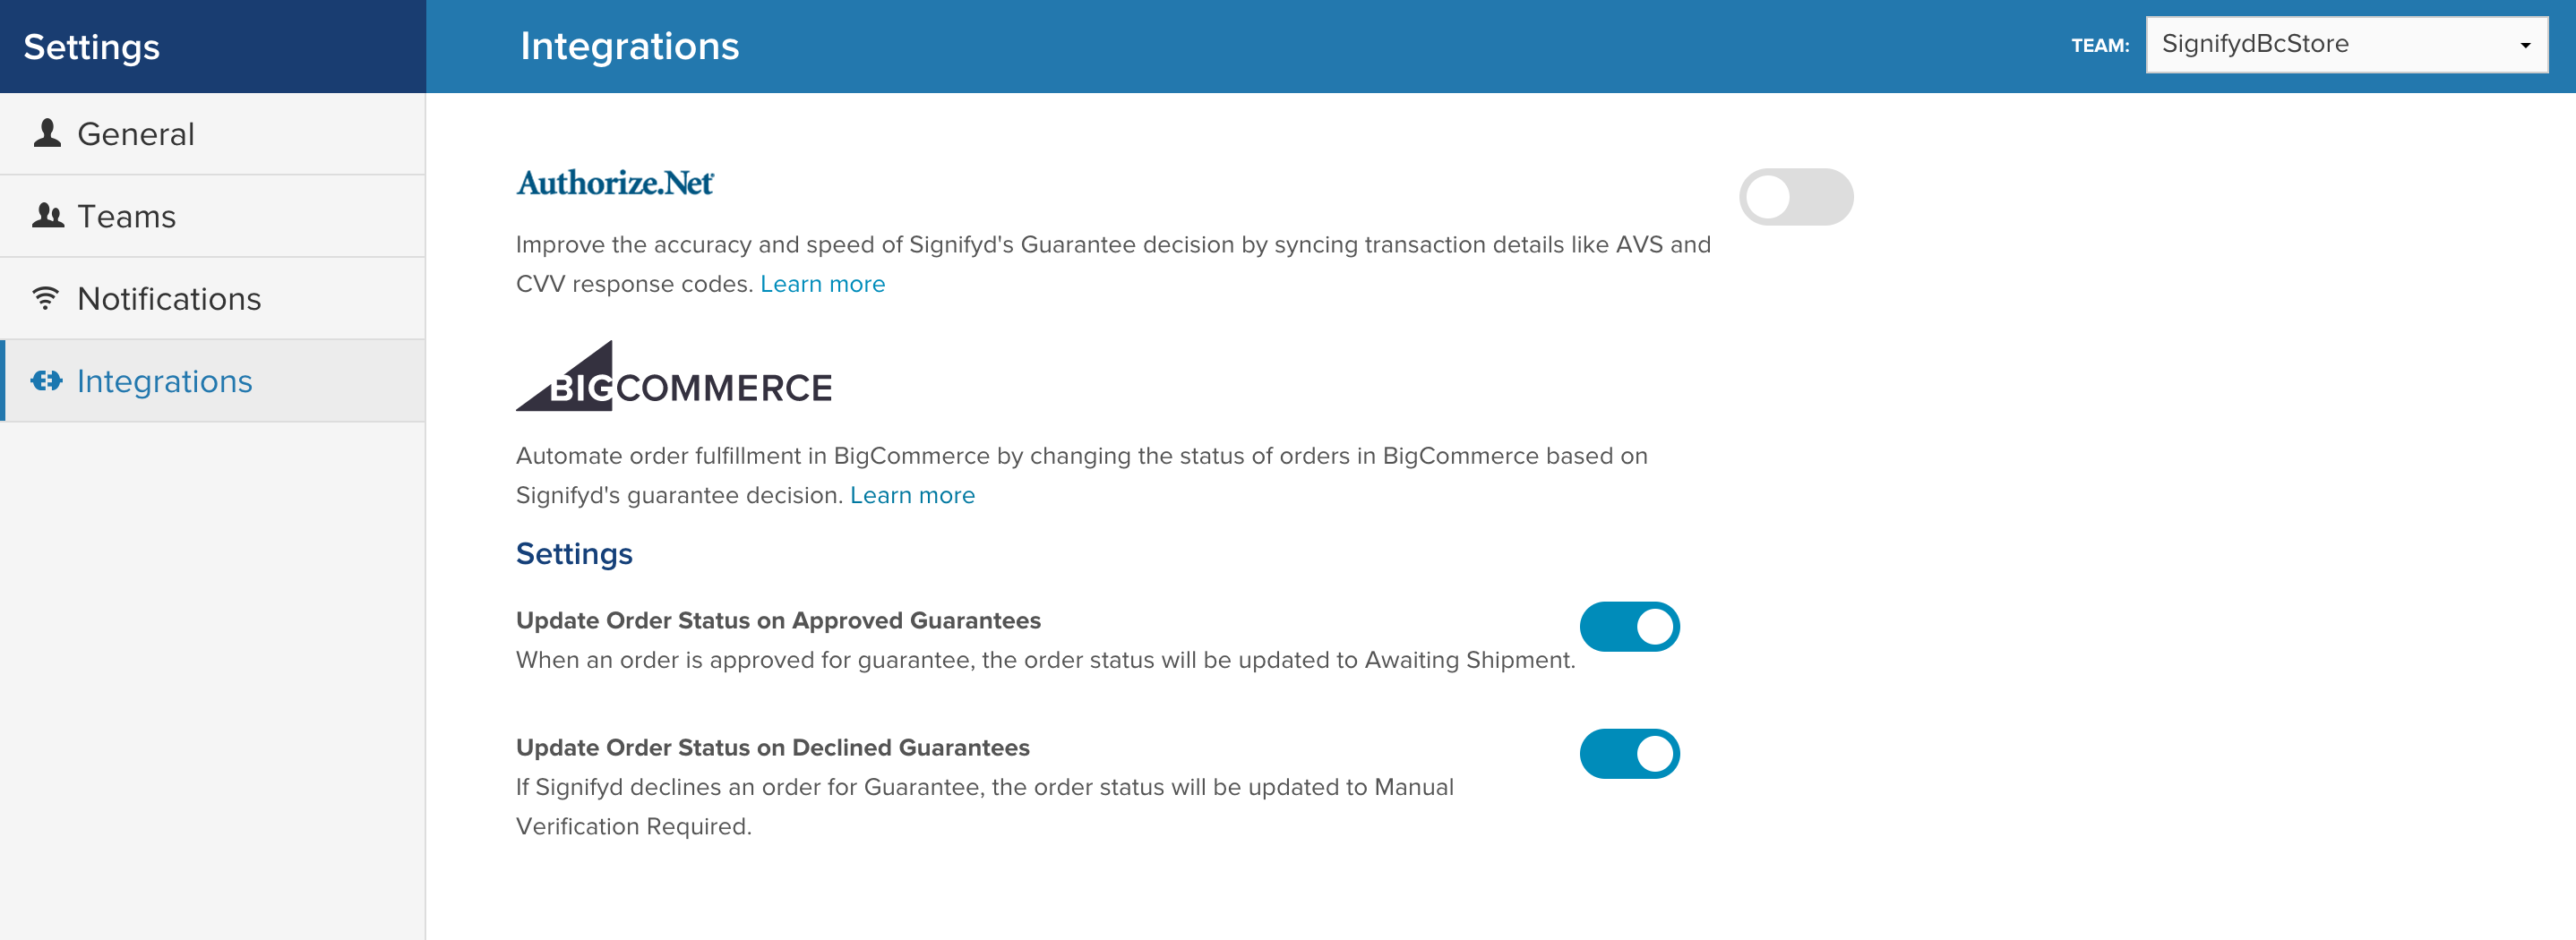 How to configure BigCommerce auto-fulfillment in the Signifyd app